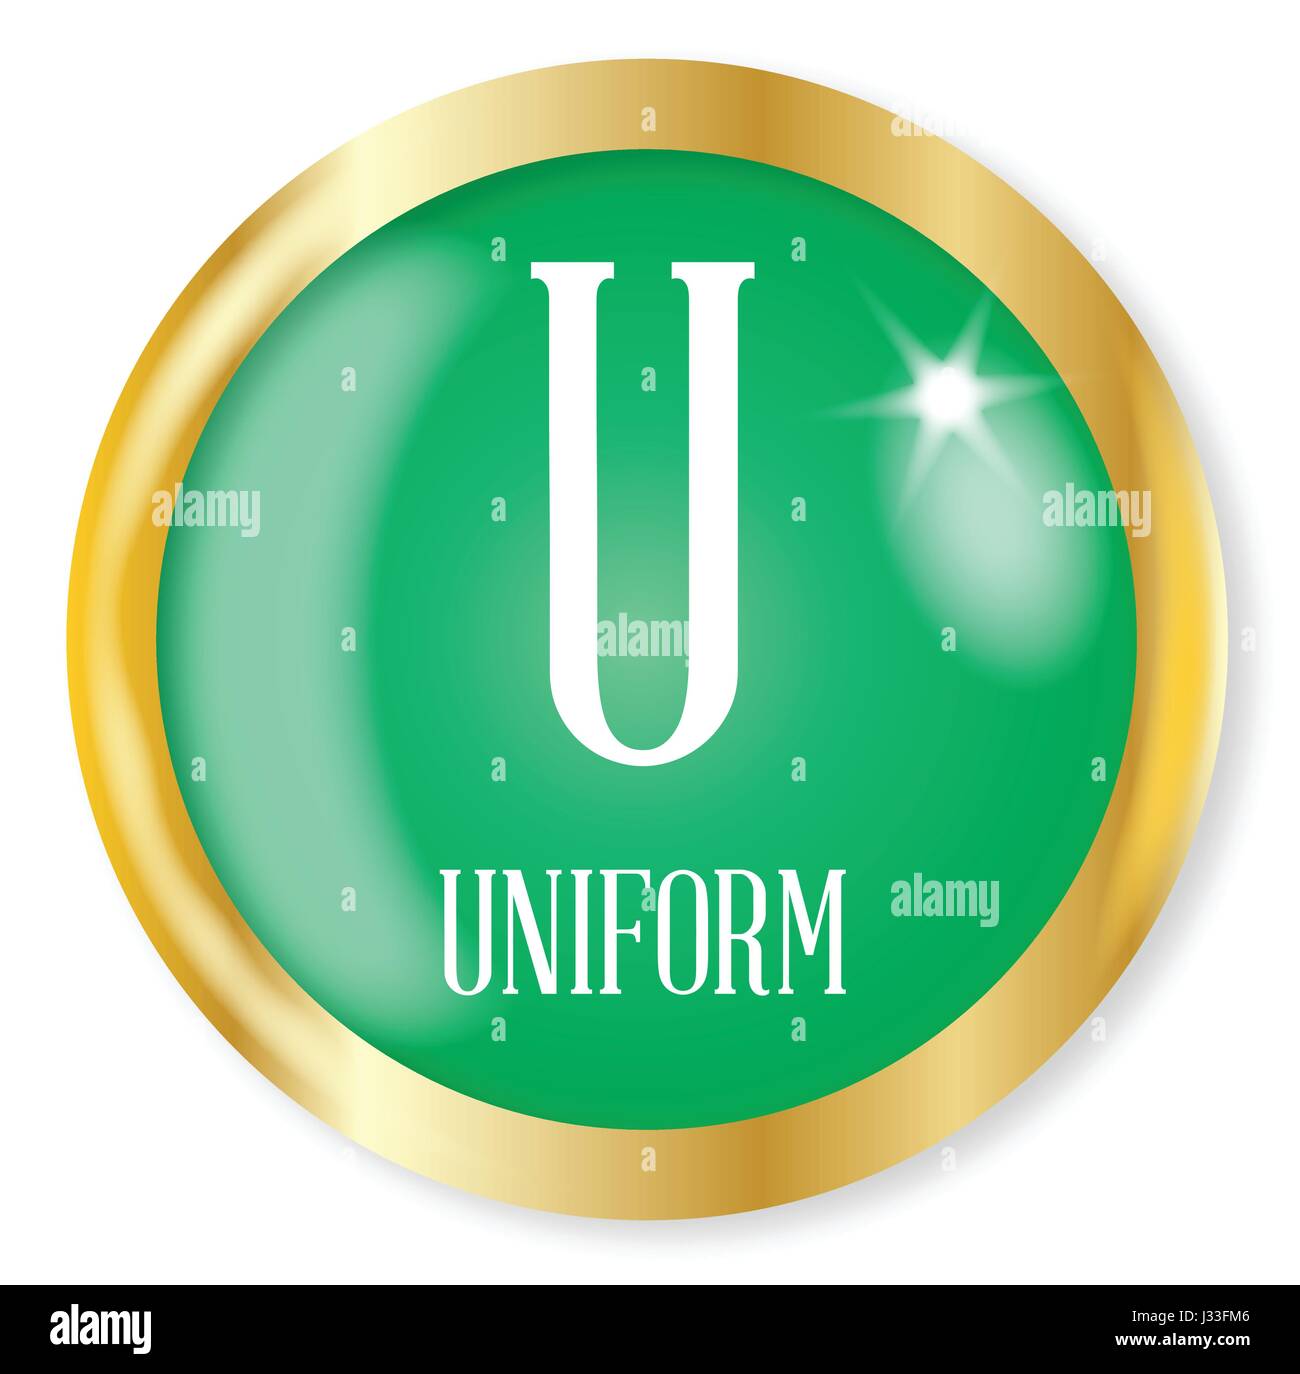 U for Uniform button from the NATO phonetic alphabet with a gold metal circular border over a white background Stock Vector